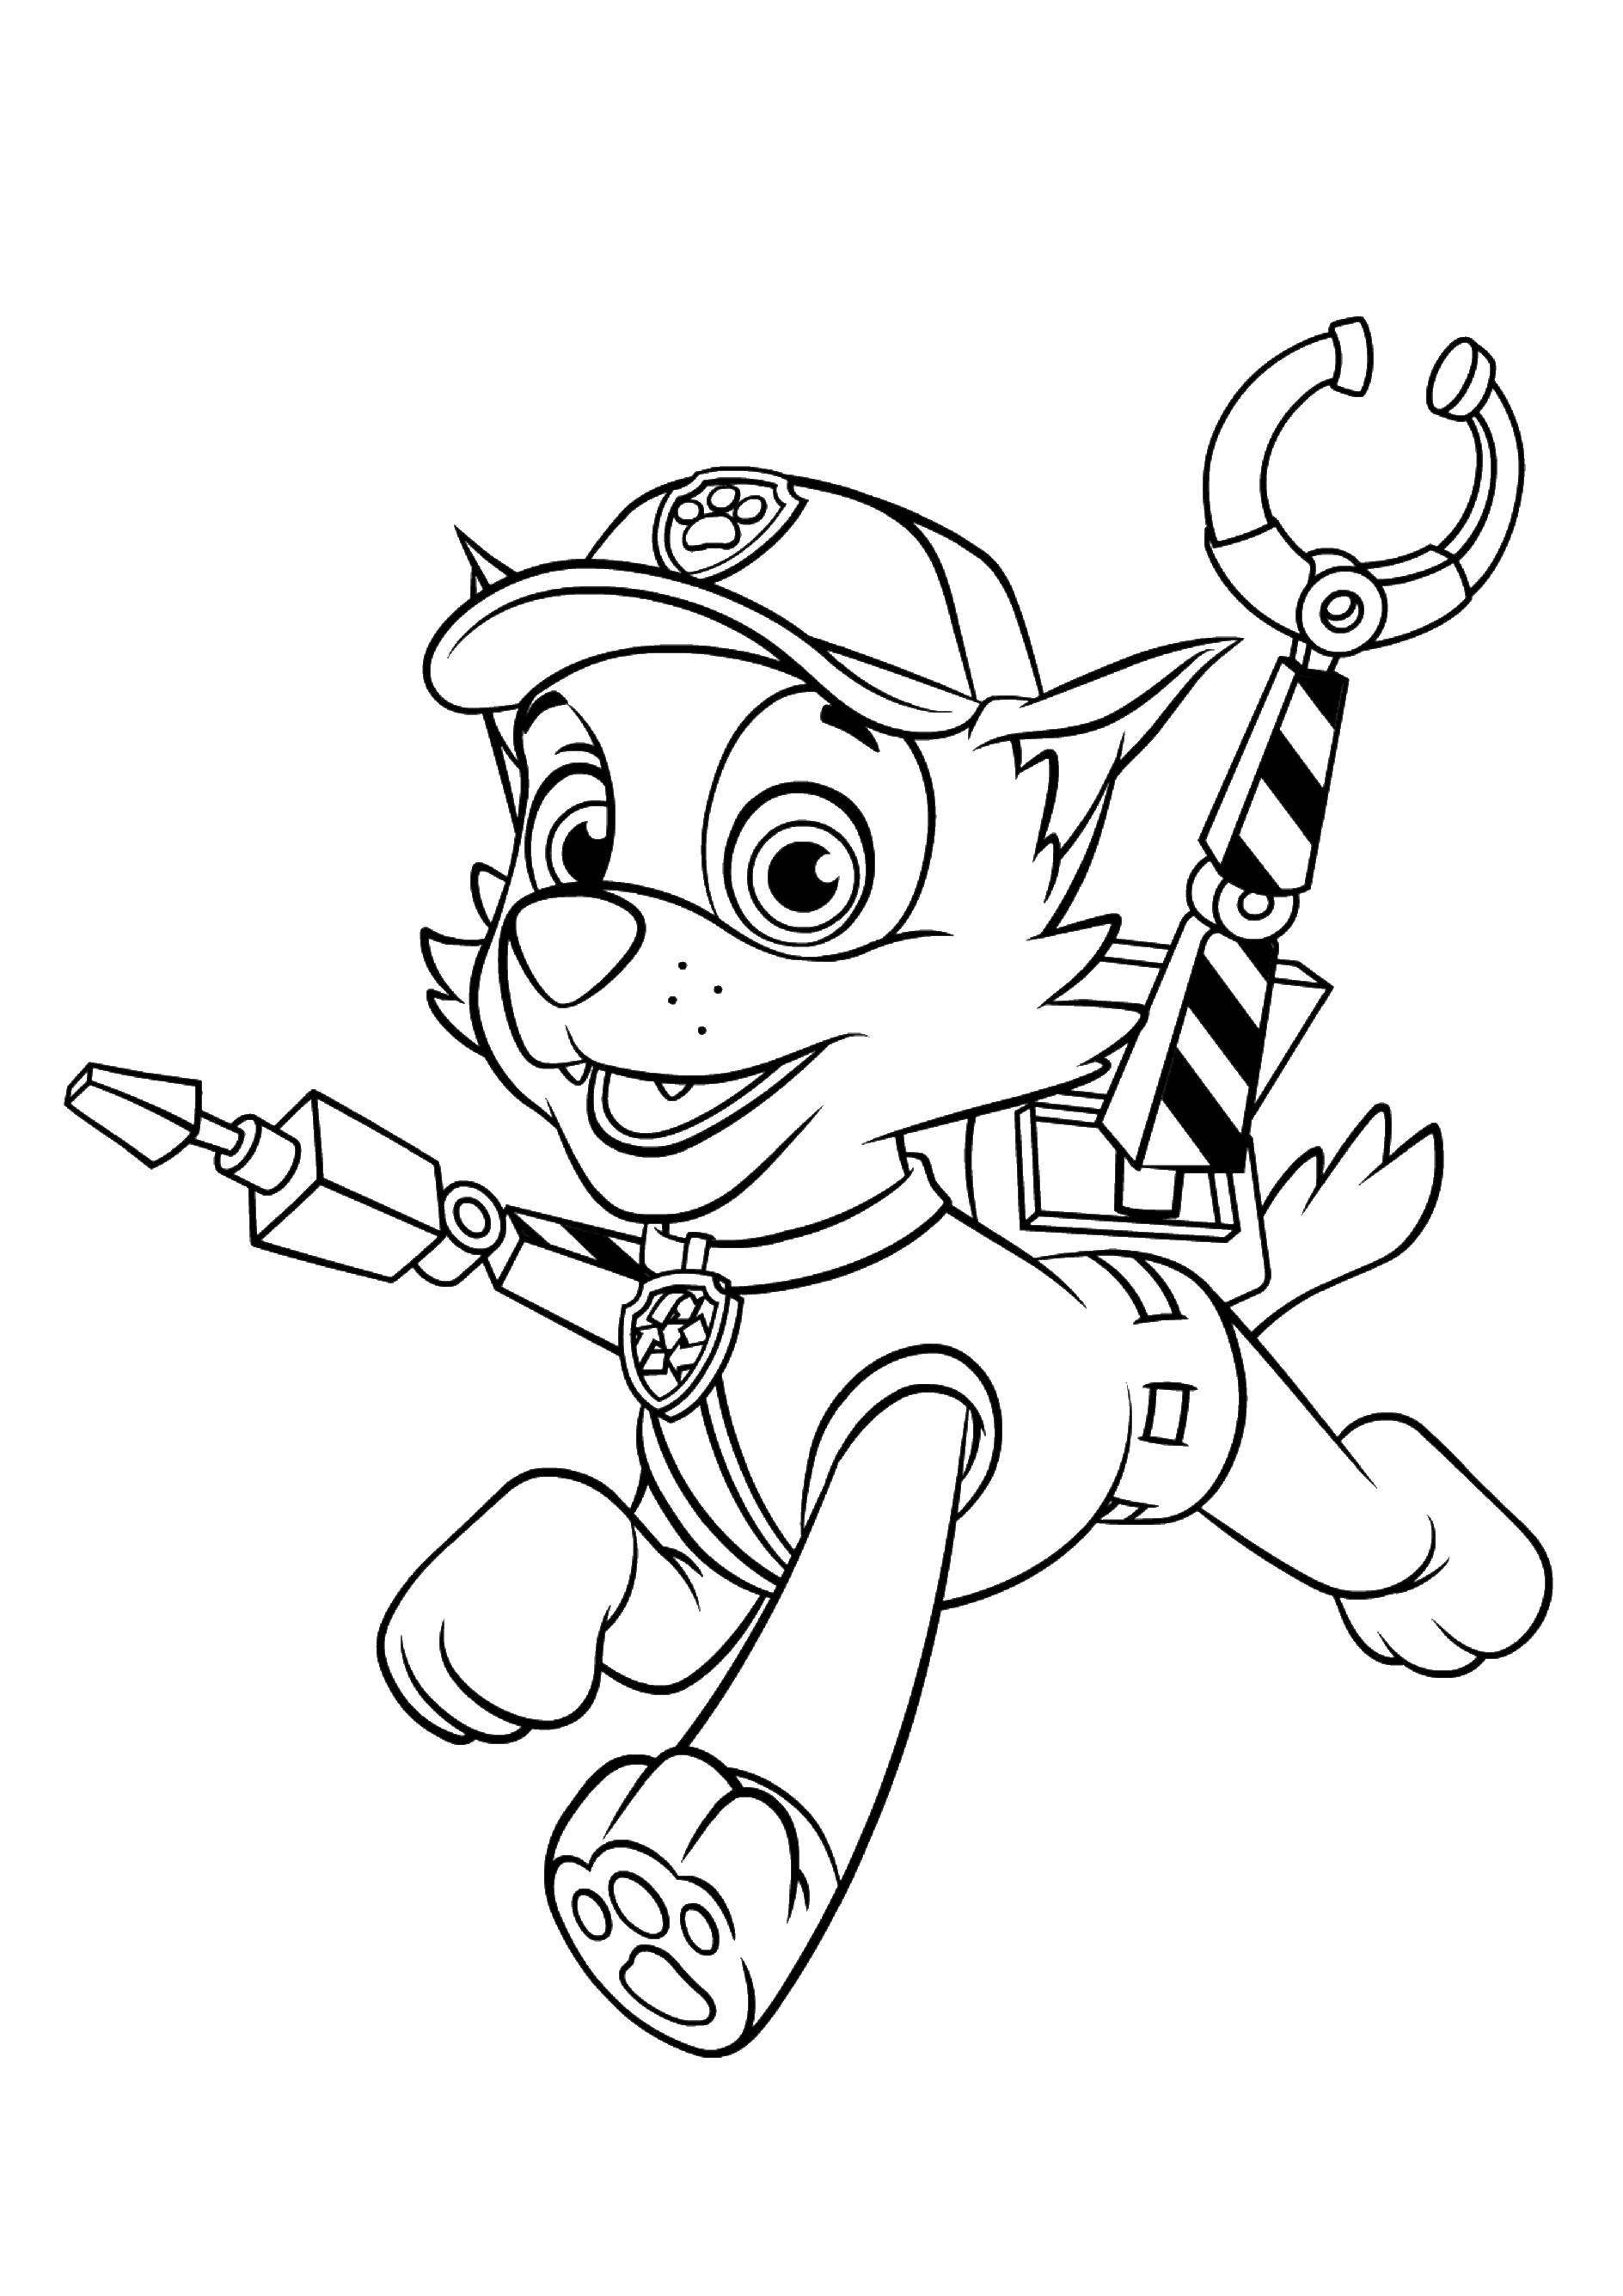 Coloring Rocky to the rescue. Category paw patrol. Tags:  Paw patrol Zuma, rocky.